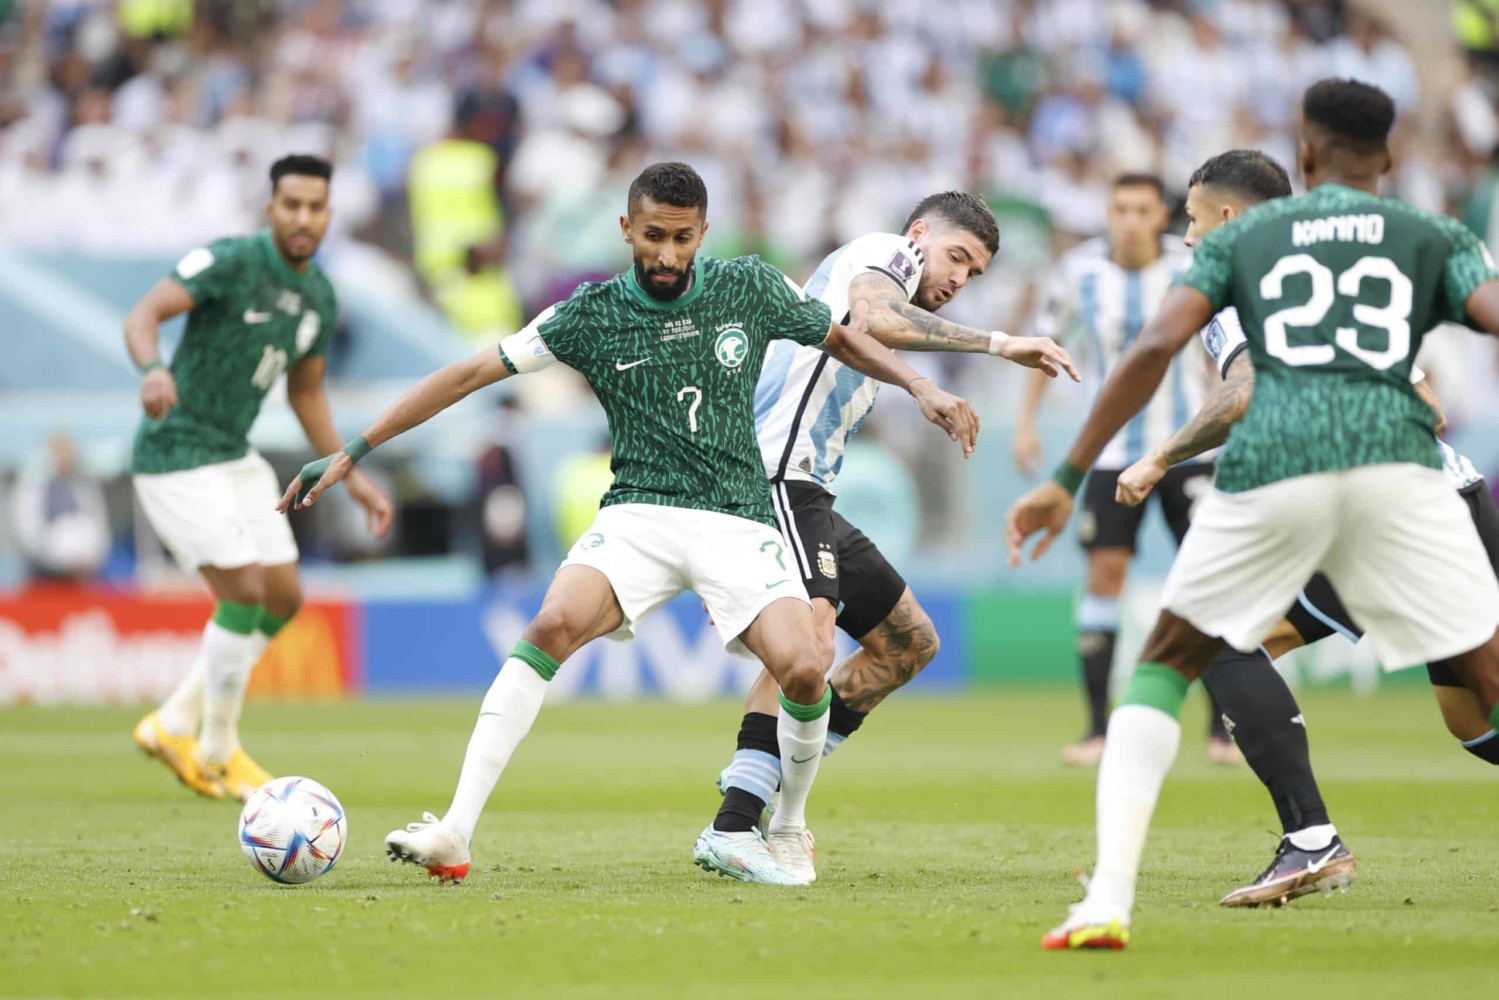 Saudi player wins ball from Argentinian player in World Cup match-up